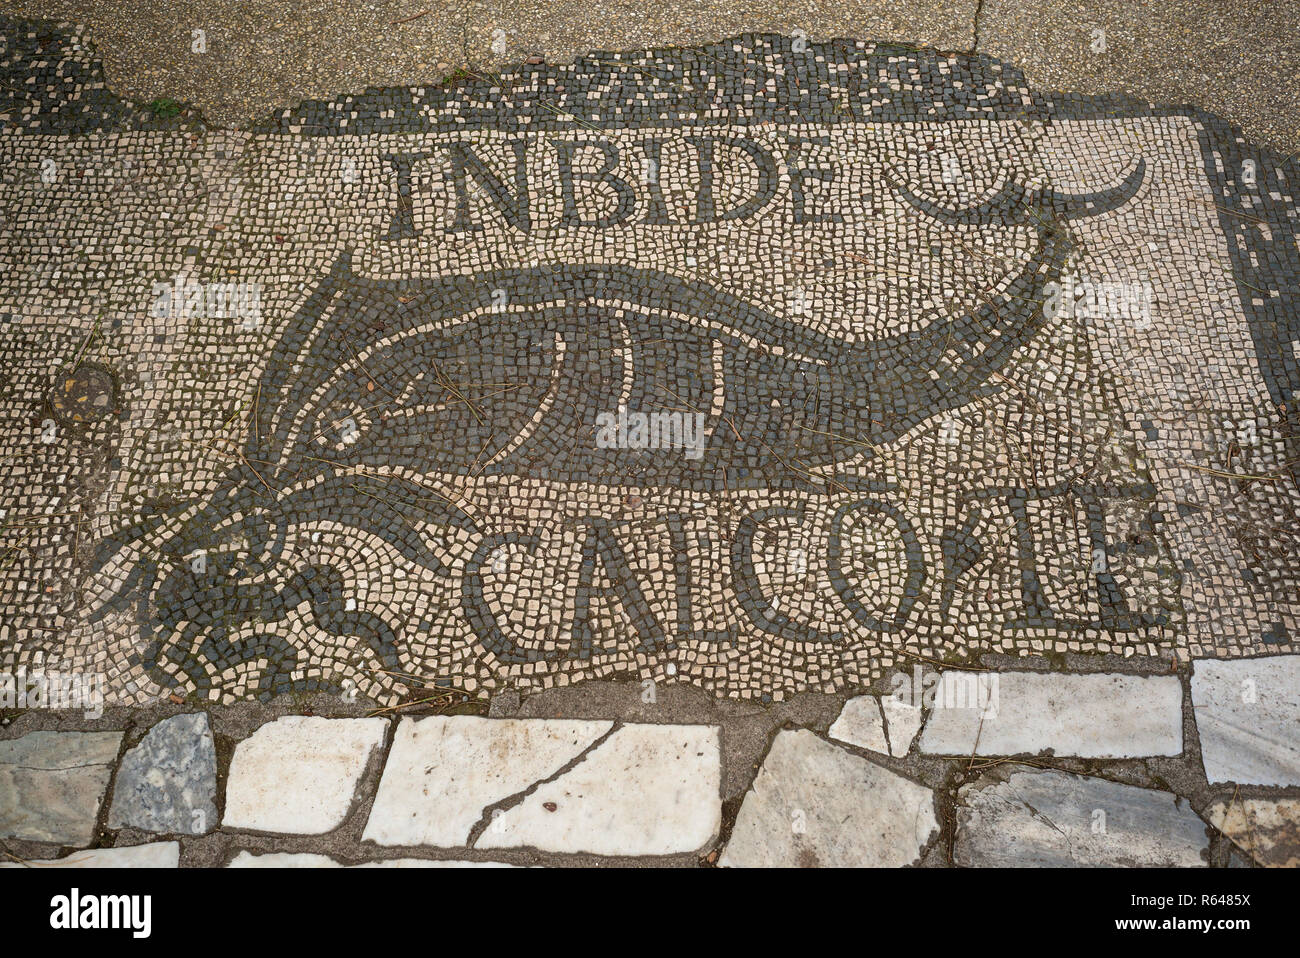 Rome. Italy. Ostia Antica. Mosaic depicting a dolphin with an octopus in its mouth and the inscription “INBIDE CALCO TE” (Envious one, I tread on you) Stock Photo